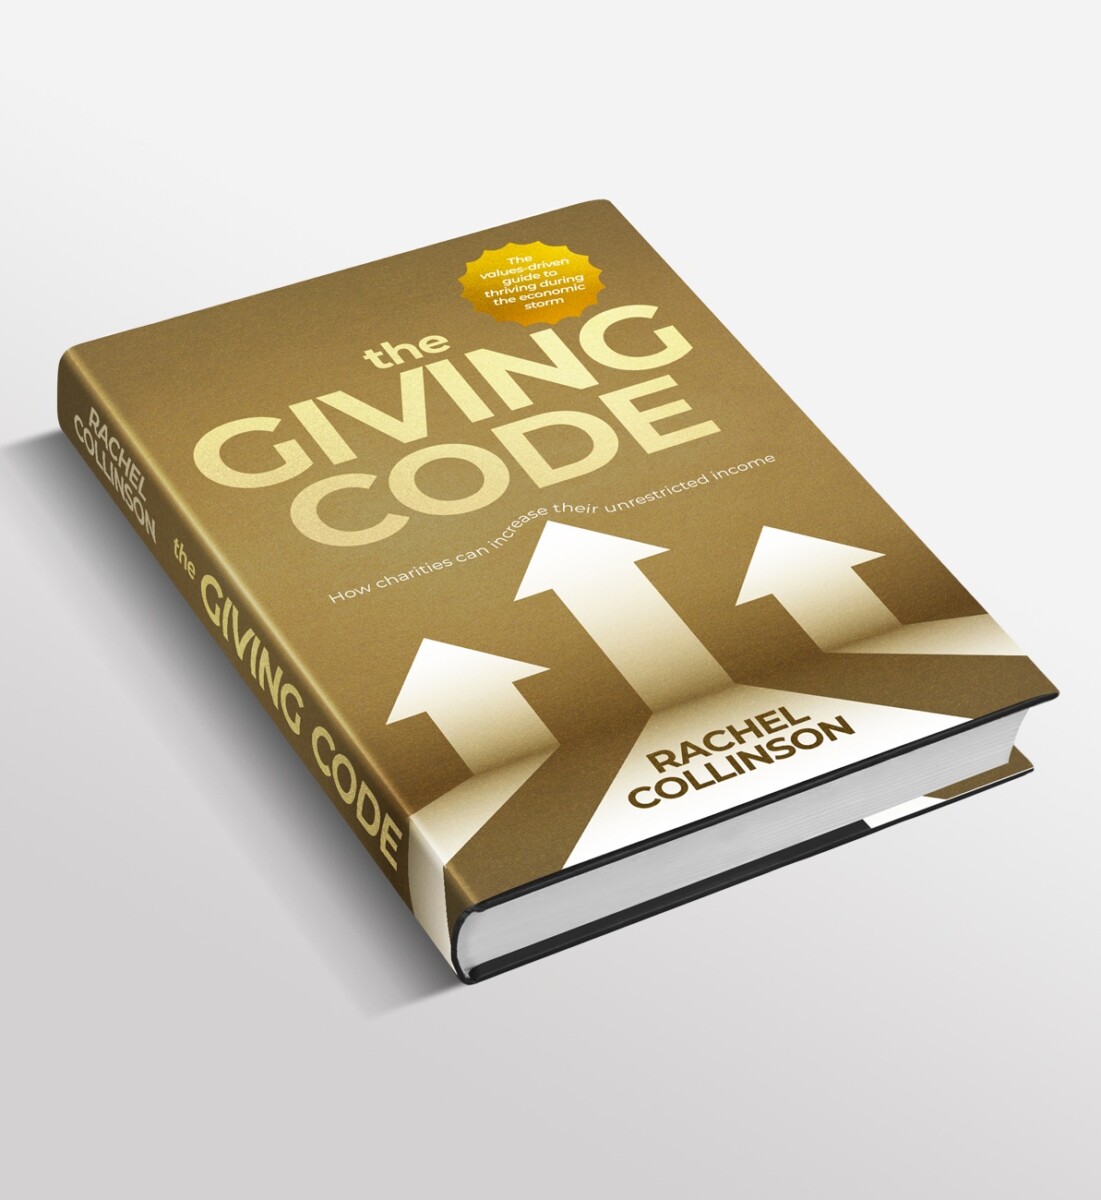 The Giving Code - by Rachel Collinson. Hardcover version.